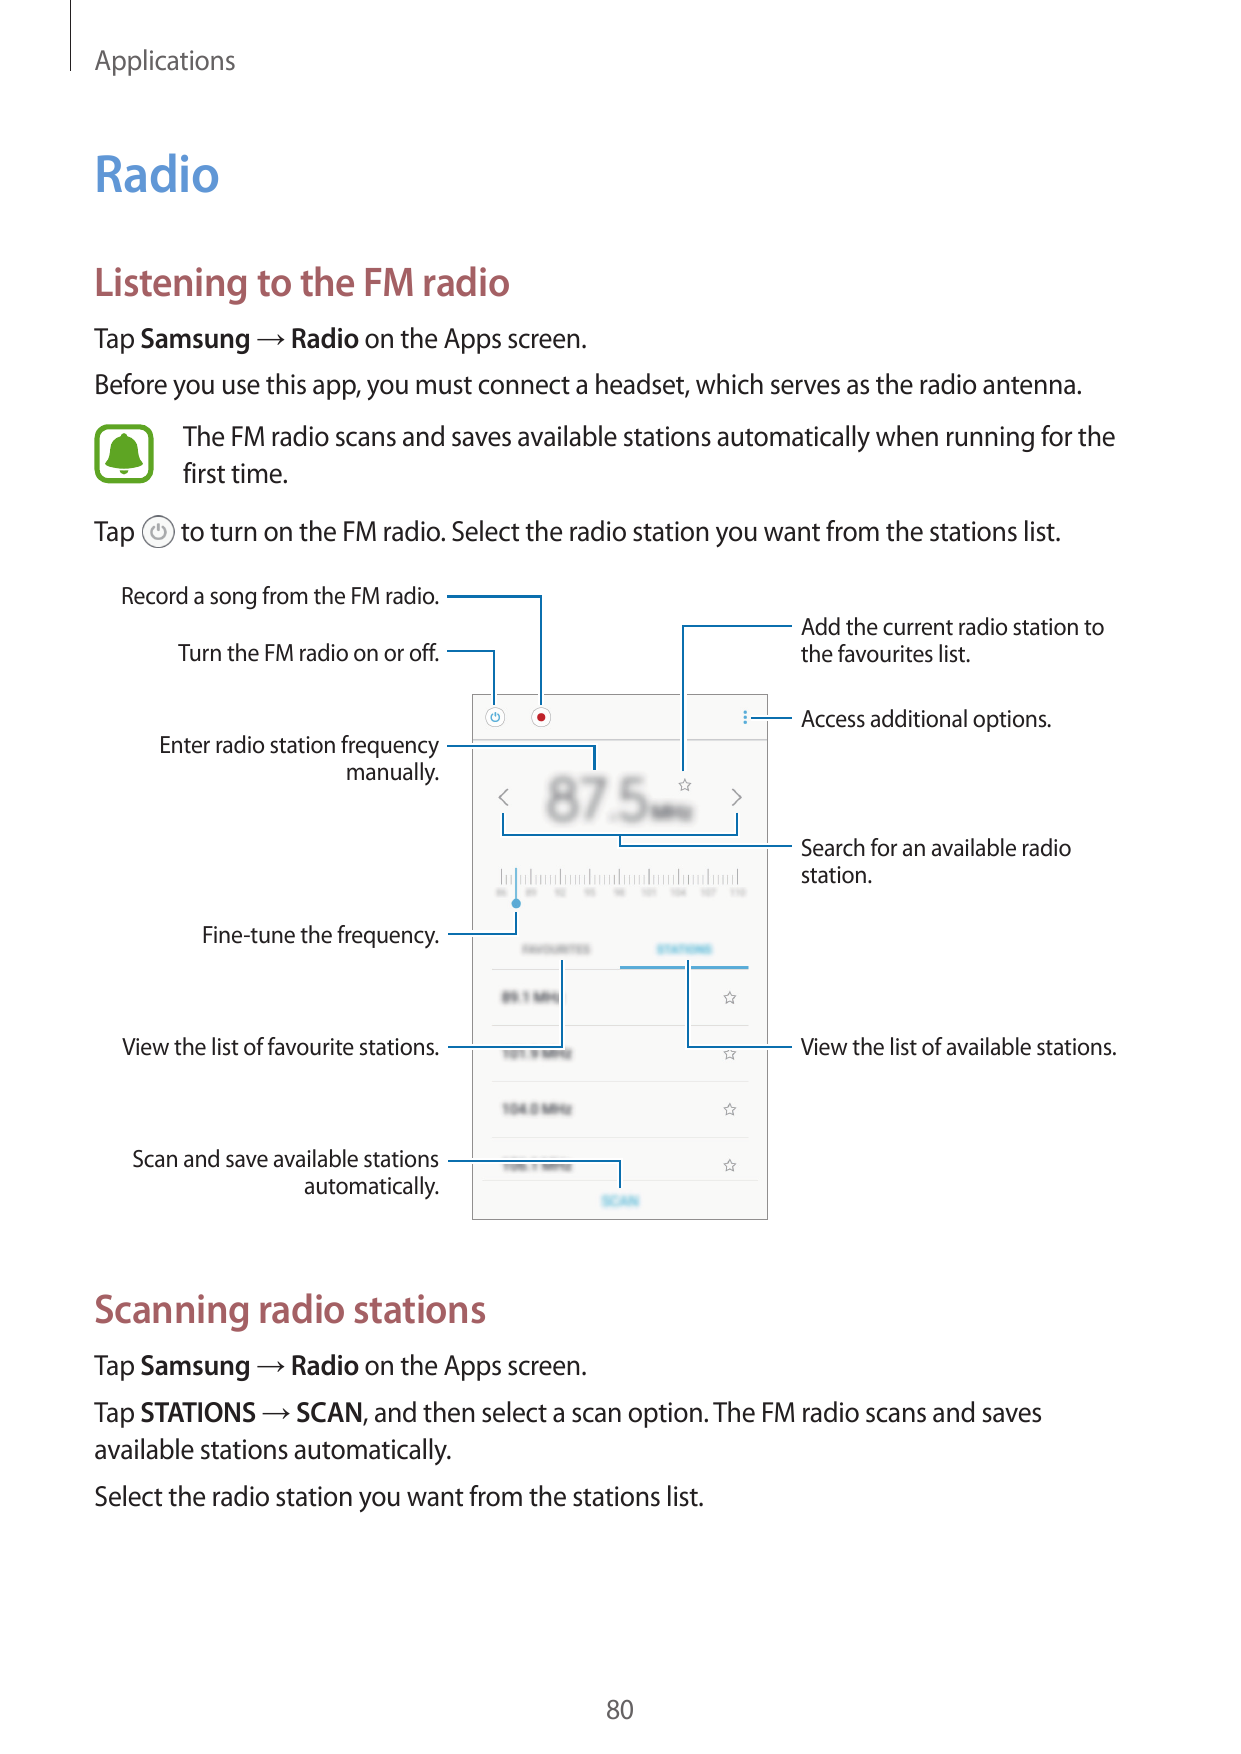 ApplicationsRadioListening to the FM radioTap Samsung → Radio on the Apps screen.Before you use this app, you must connect a hea